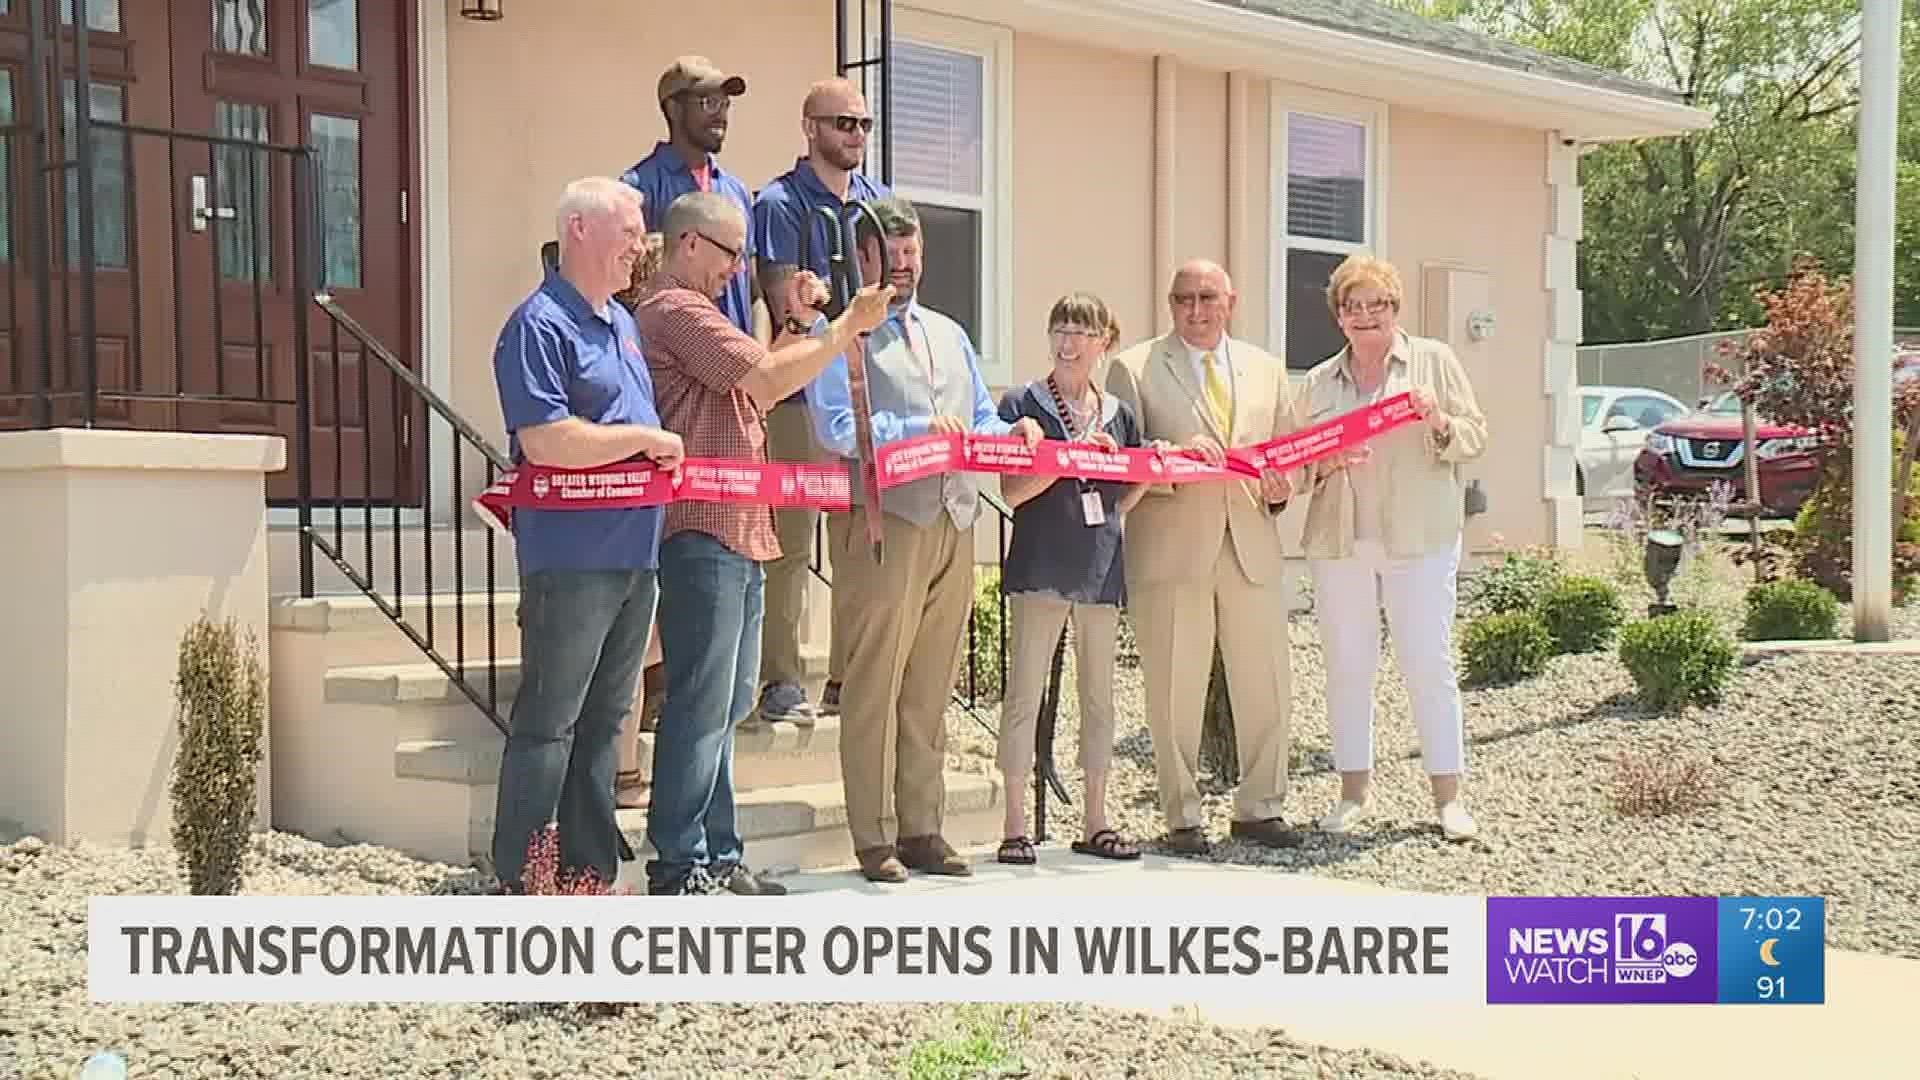 There's a new effort in Wilkes-Barre to help men transform their lives.